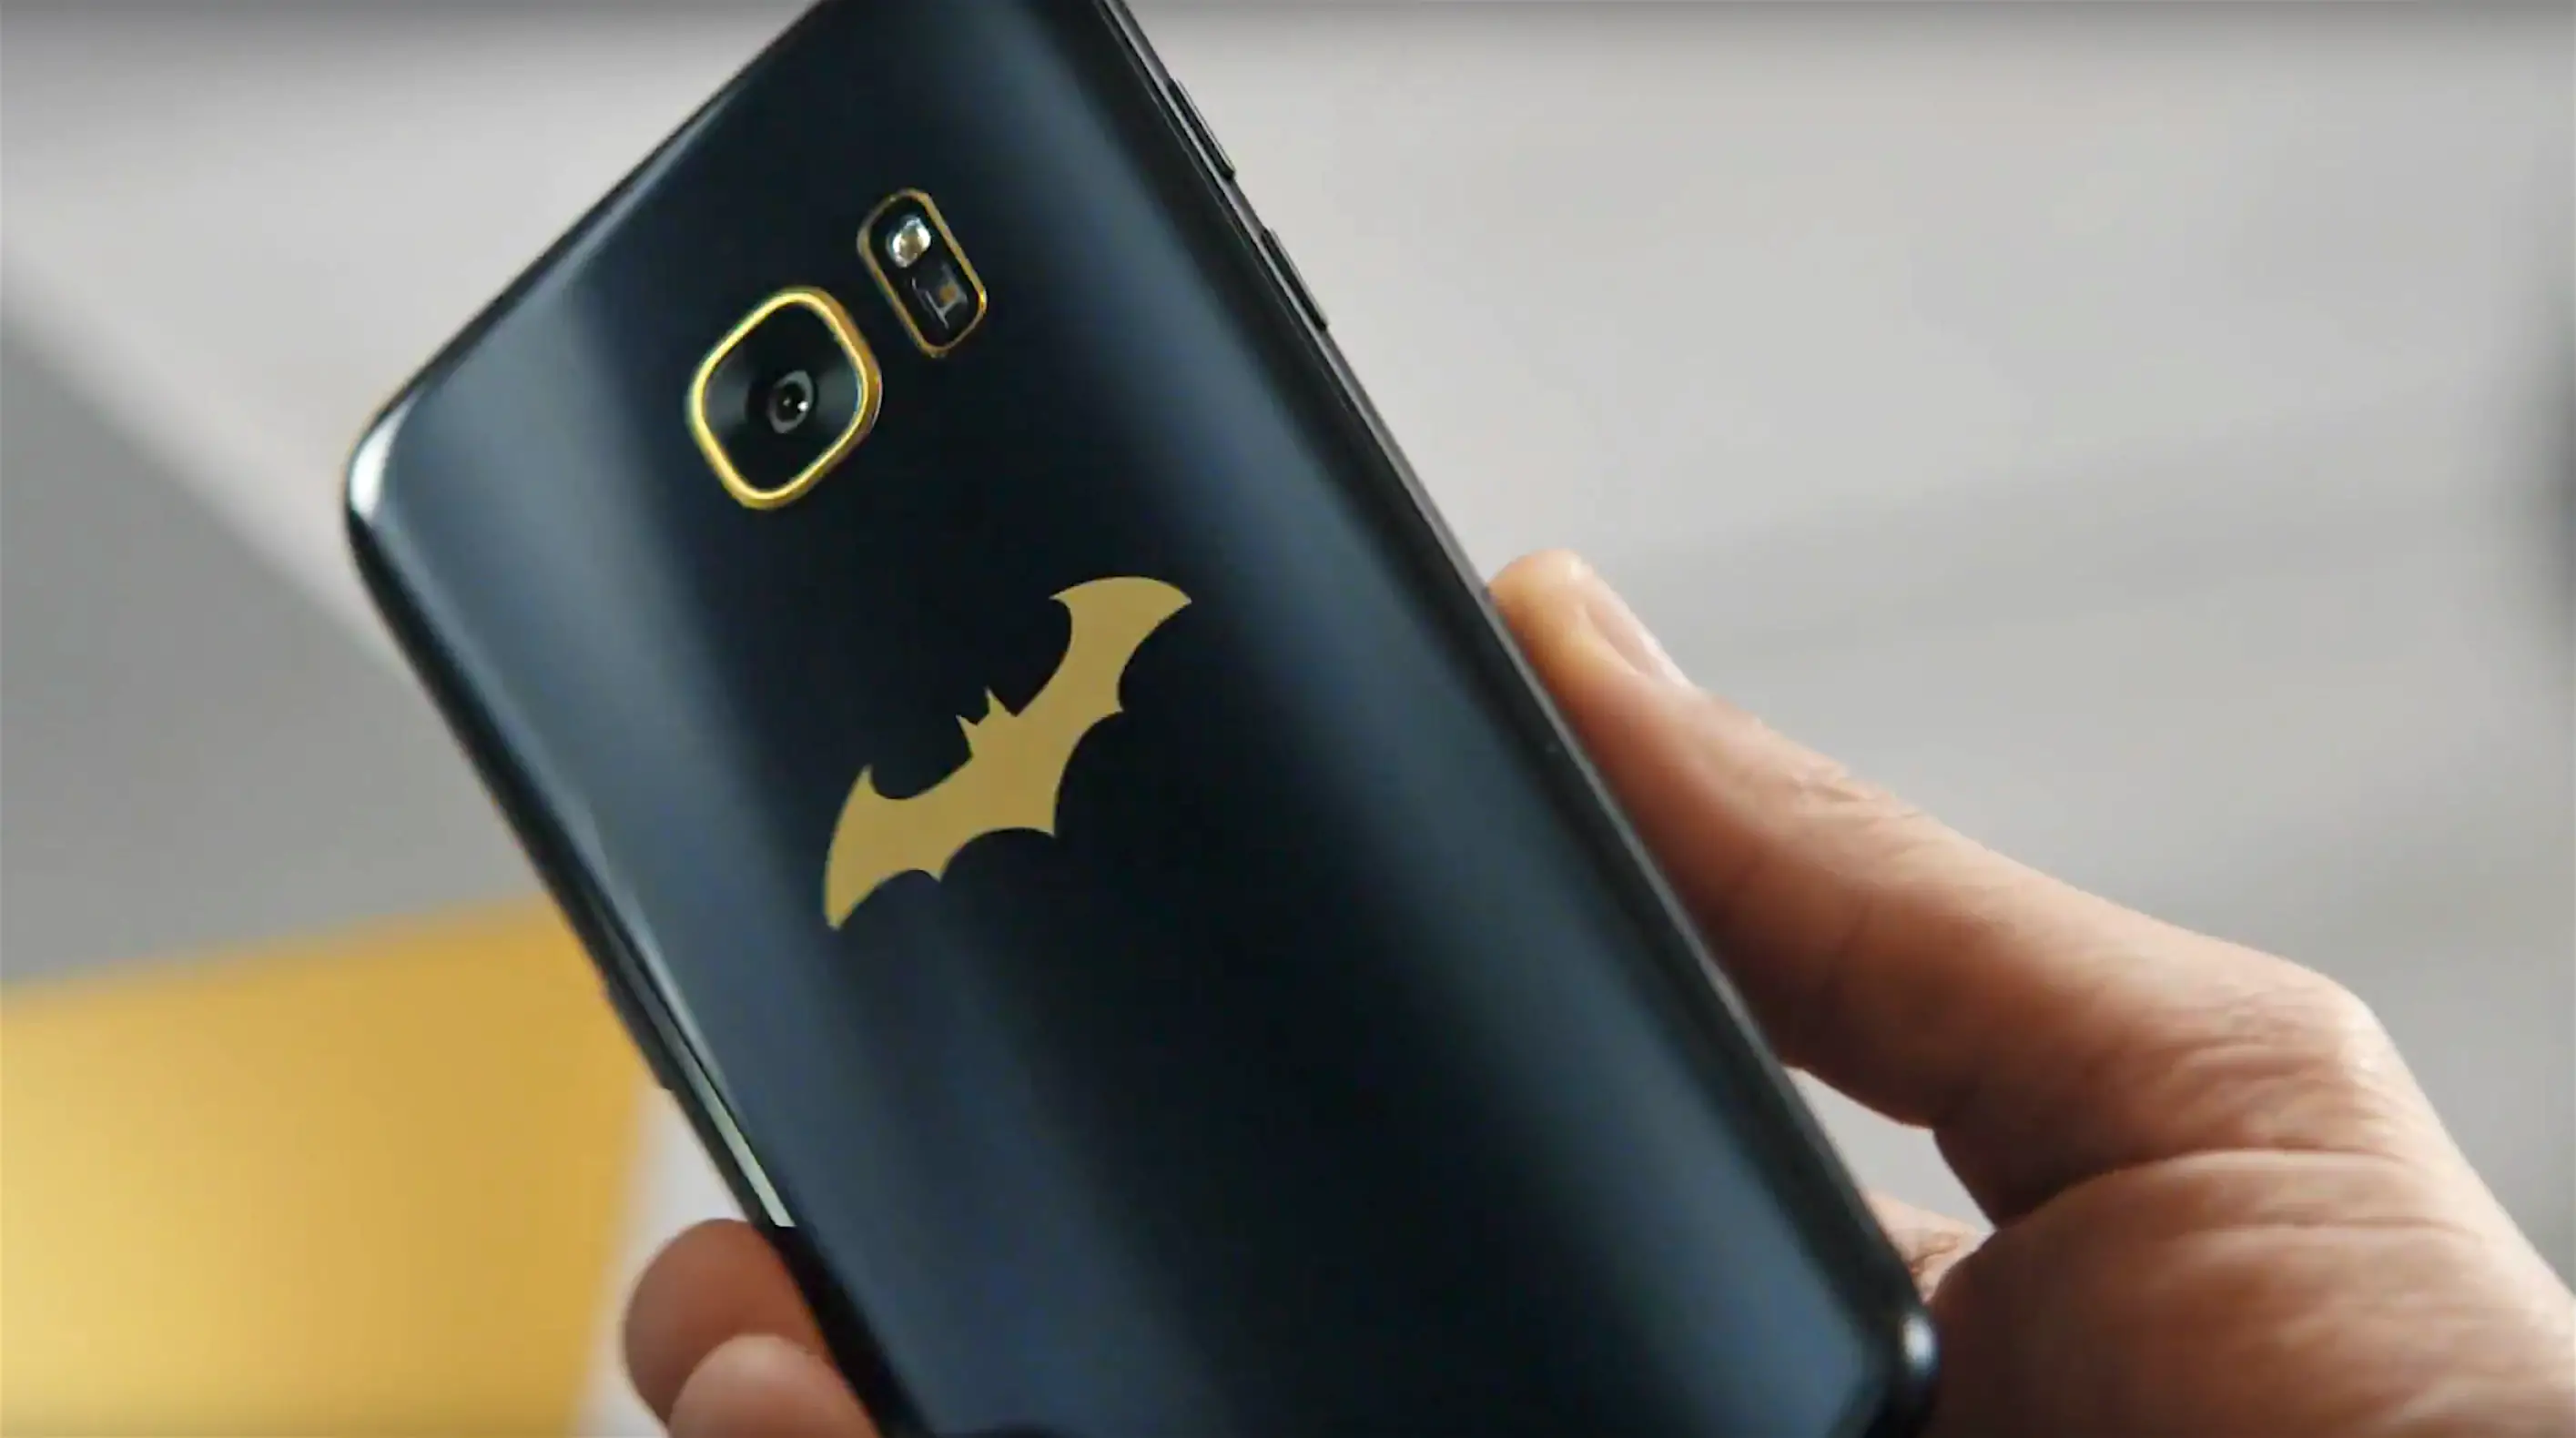 Samsung Galaxy S7 Edge Injustice Edition unveiled in official unboxing  [VIDEO] – Phandroid